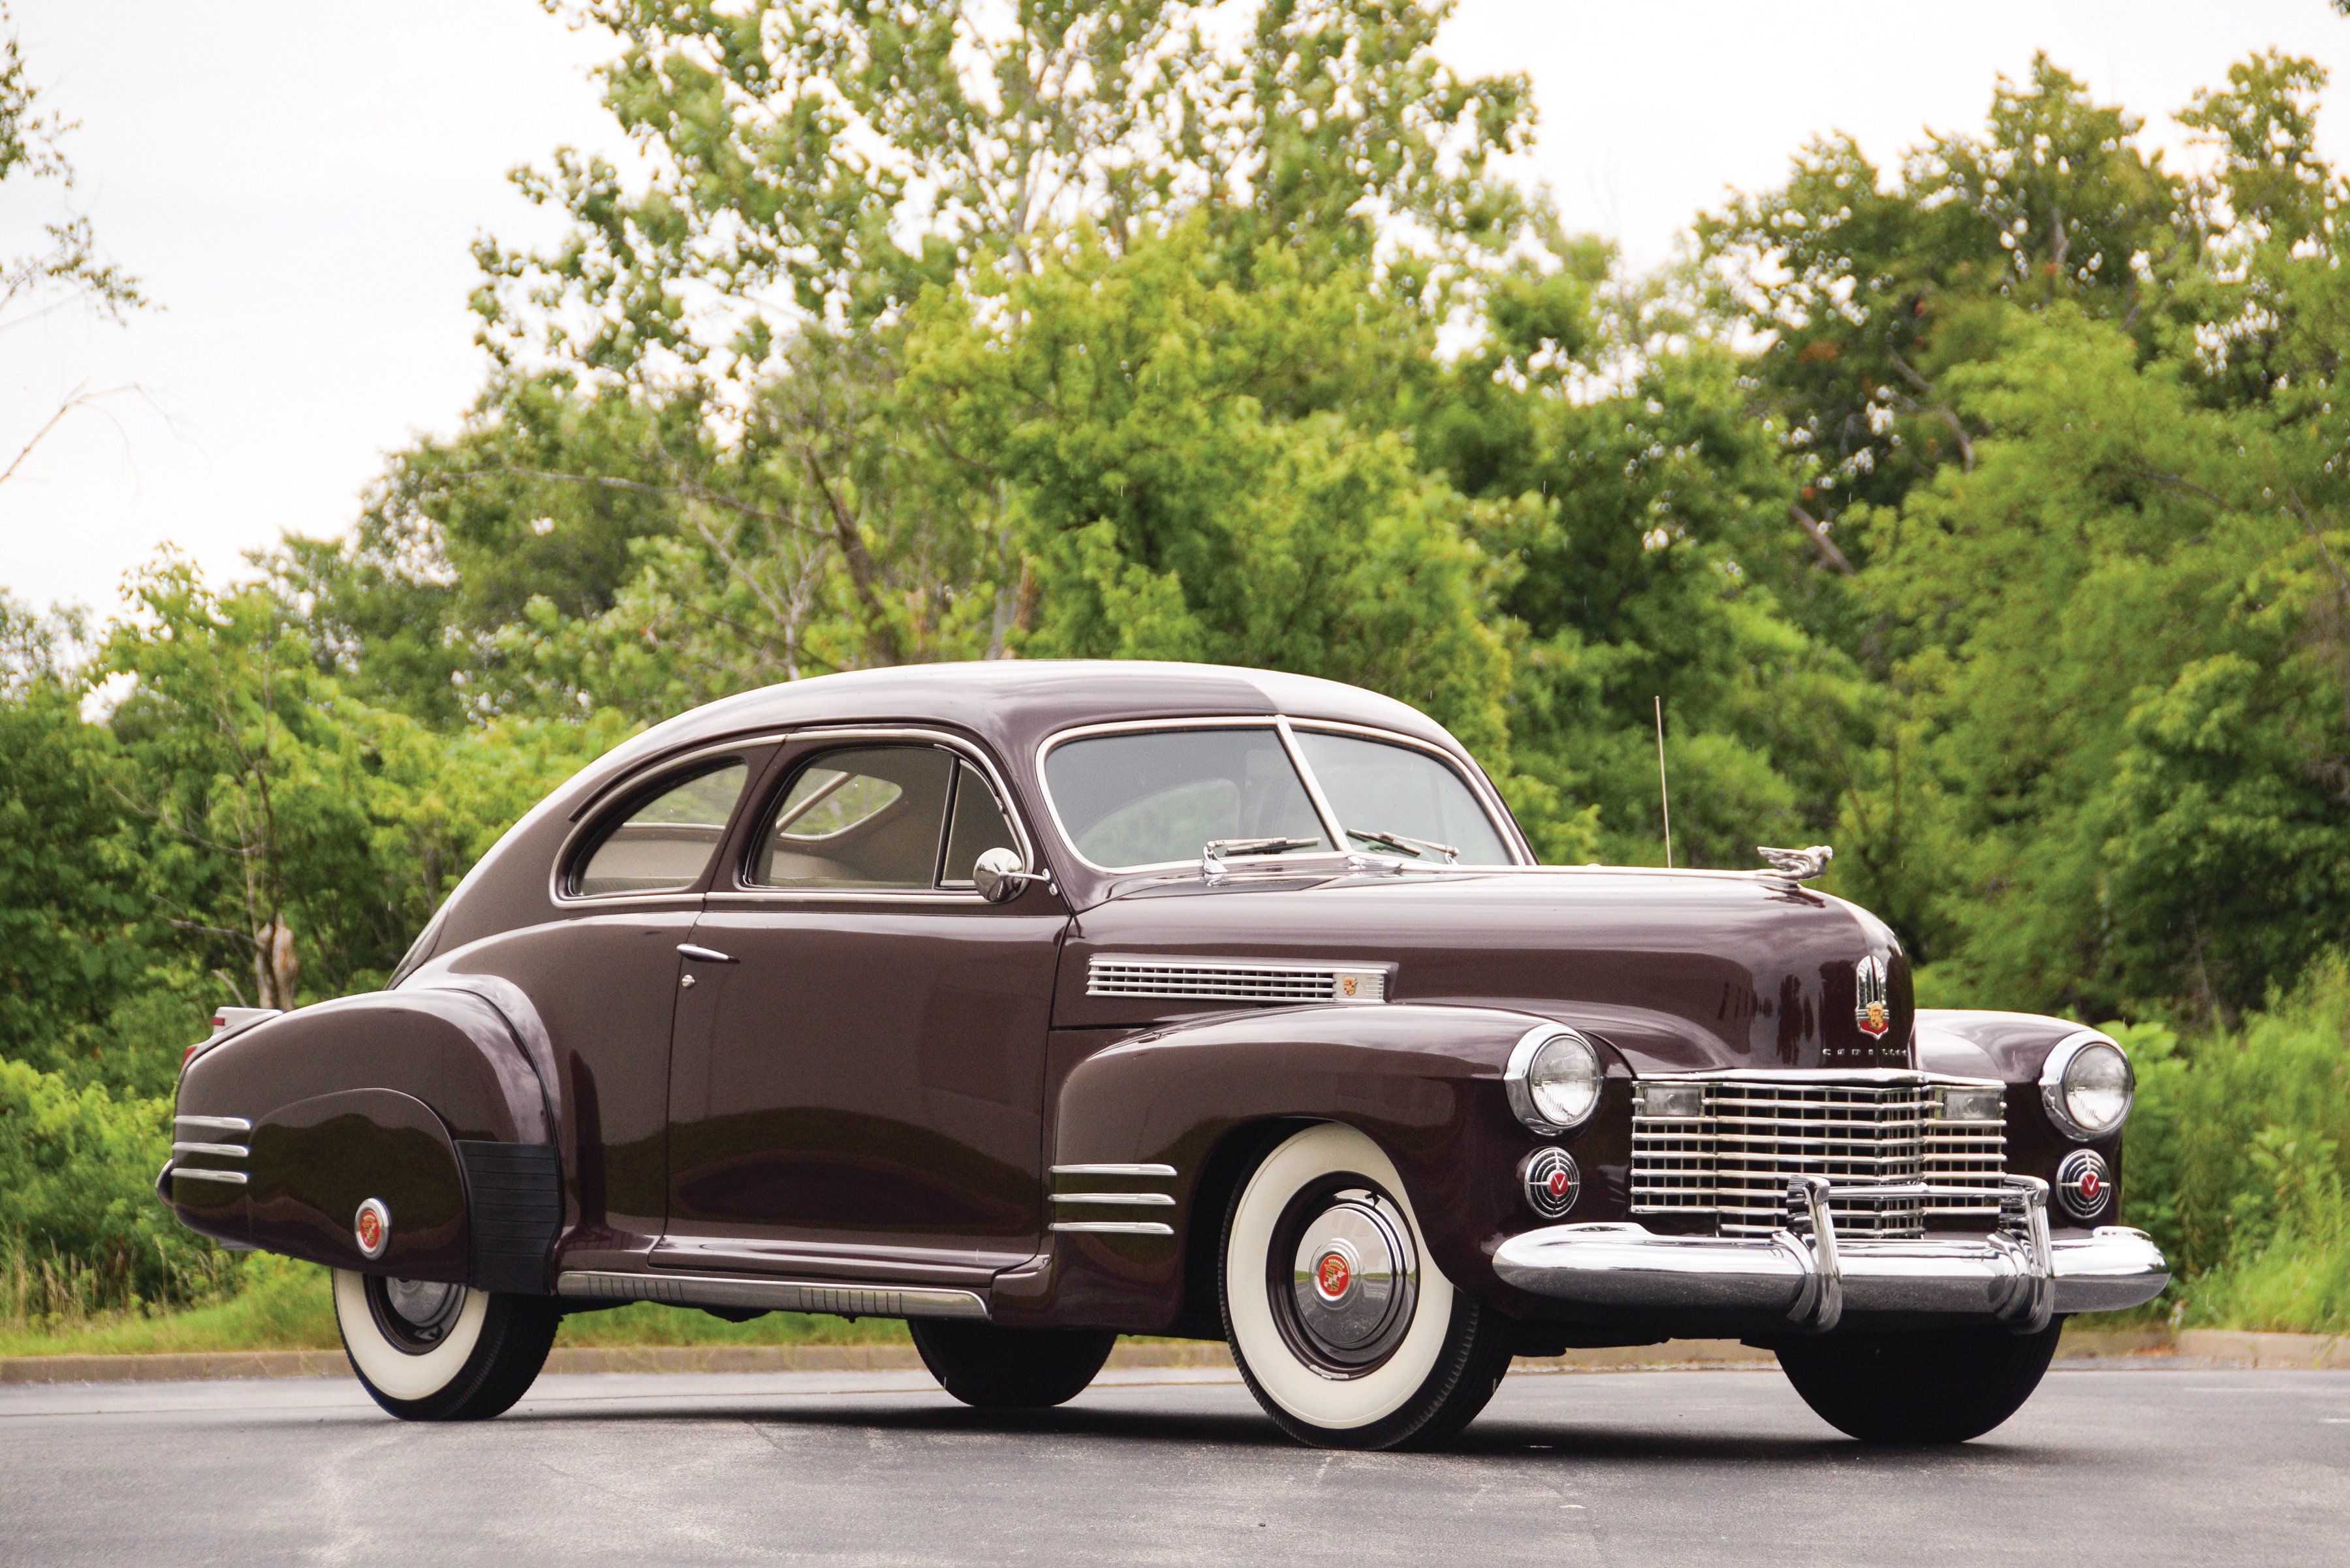 1941, Cadillac, Sixty one, Coupe, 6127, Luxury, Retro Wallpaper